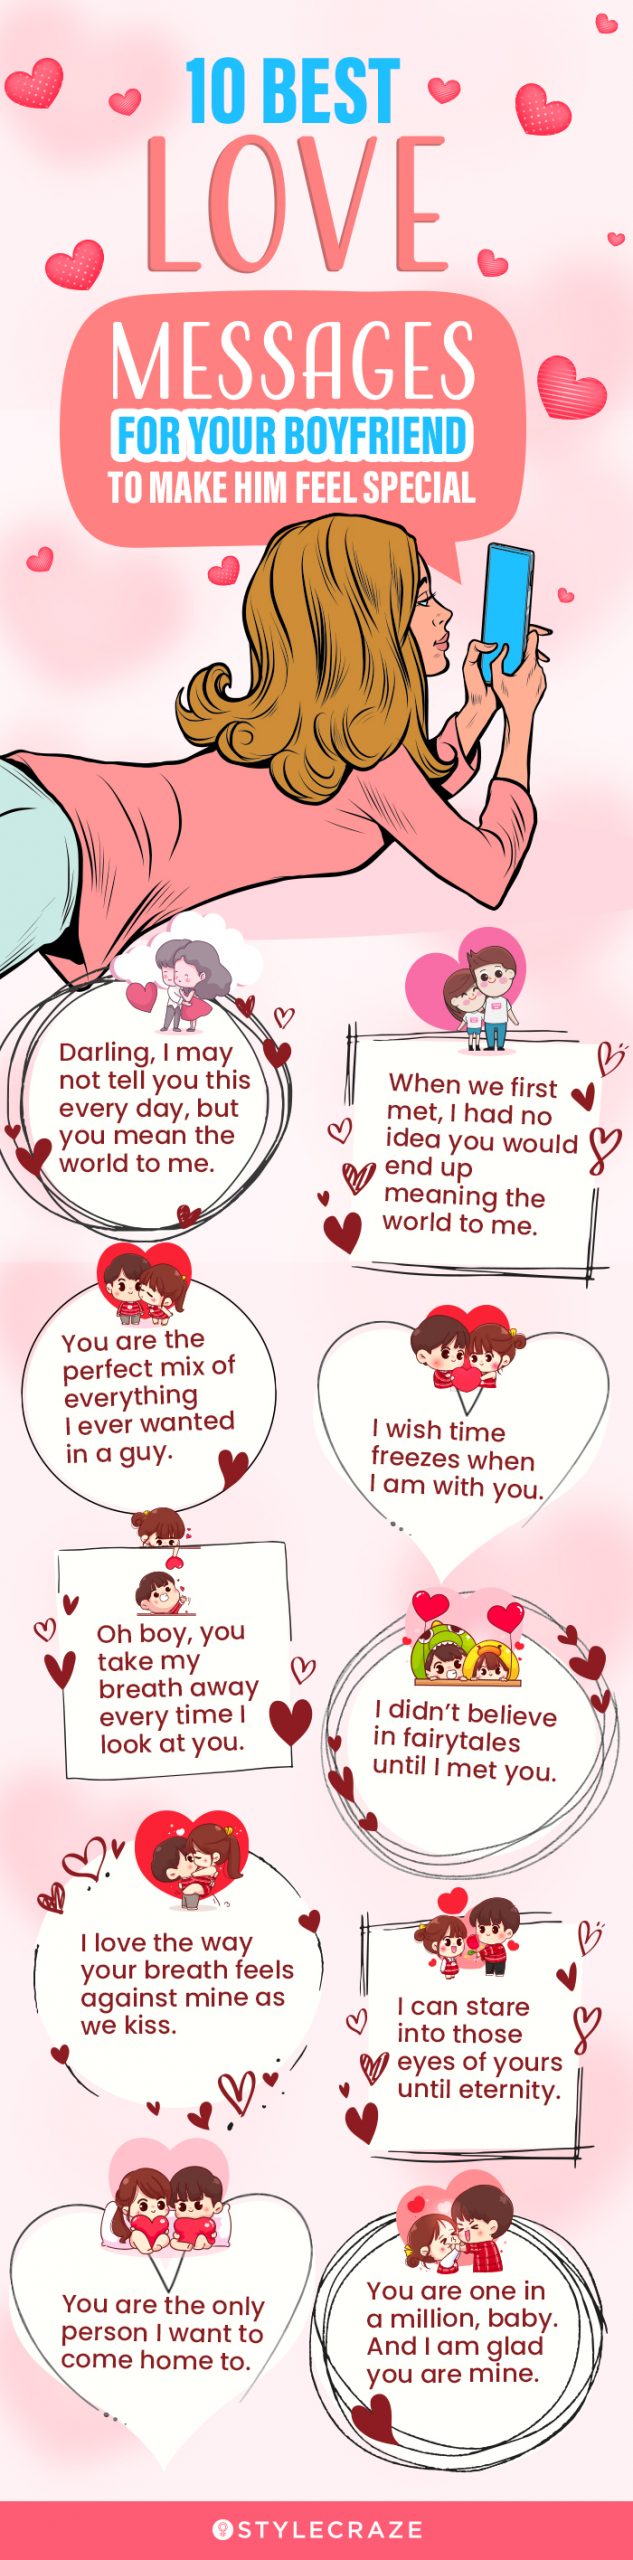 best love messages for your boyfriend to make him feel special [infographic]